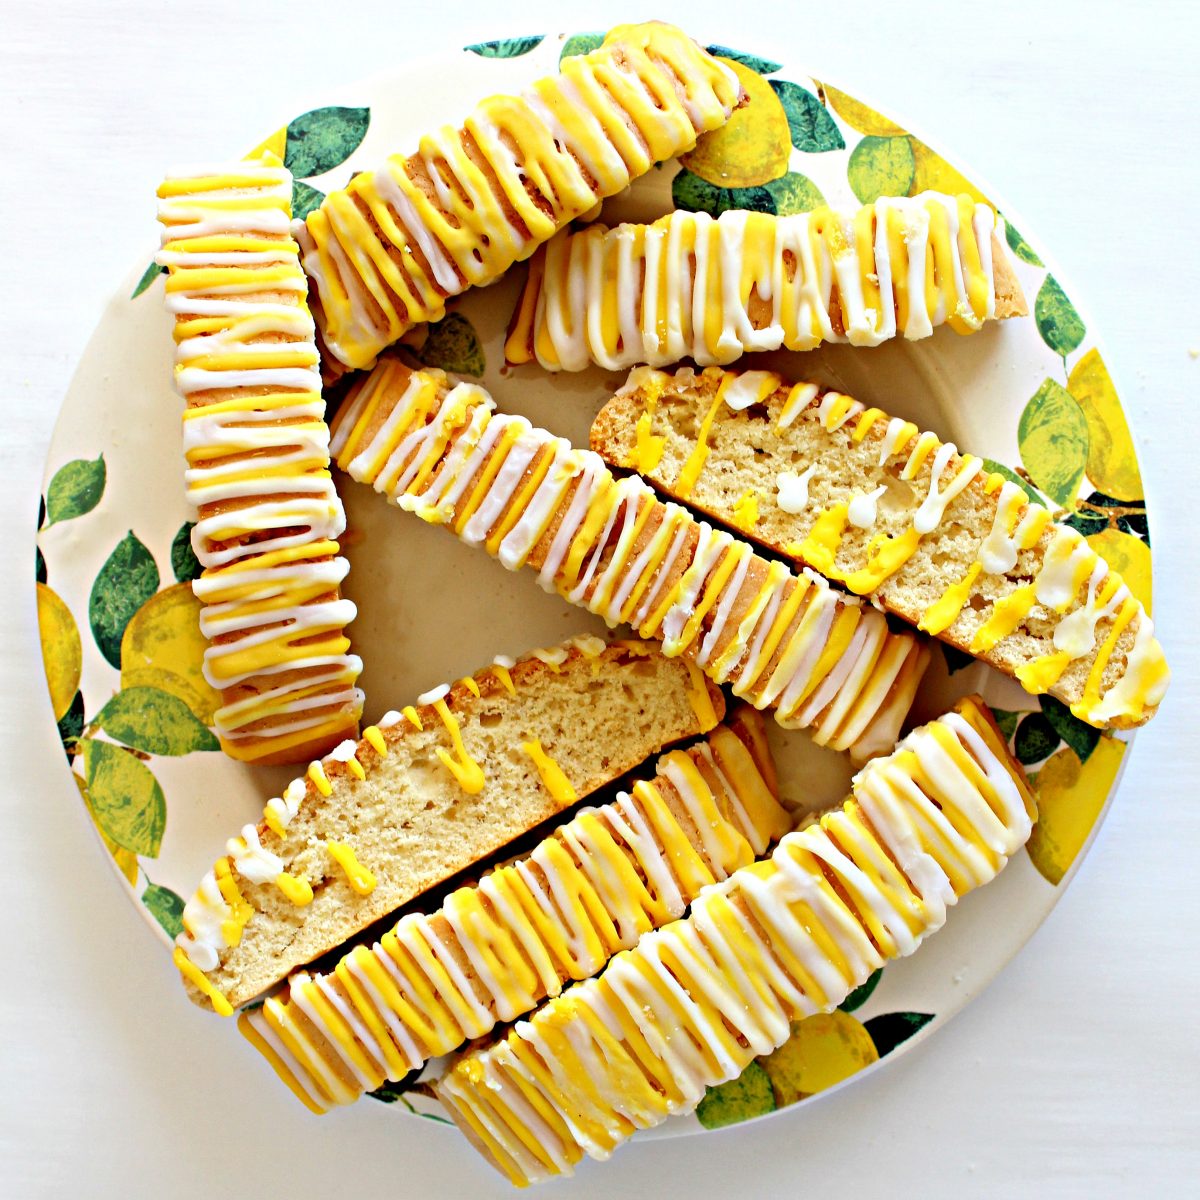 Serving plate of biscotti, showing zigzag icing stripes on top and others showing cut edge.